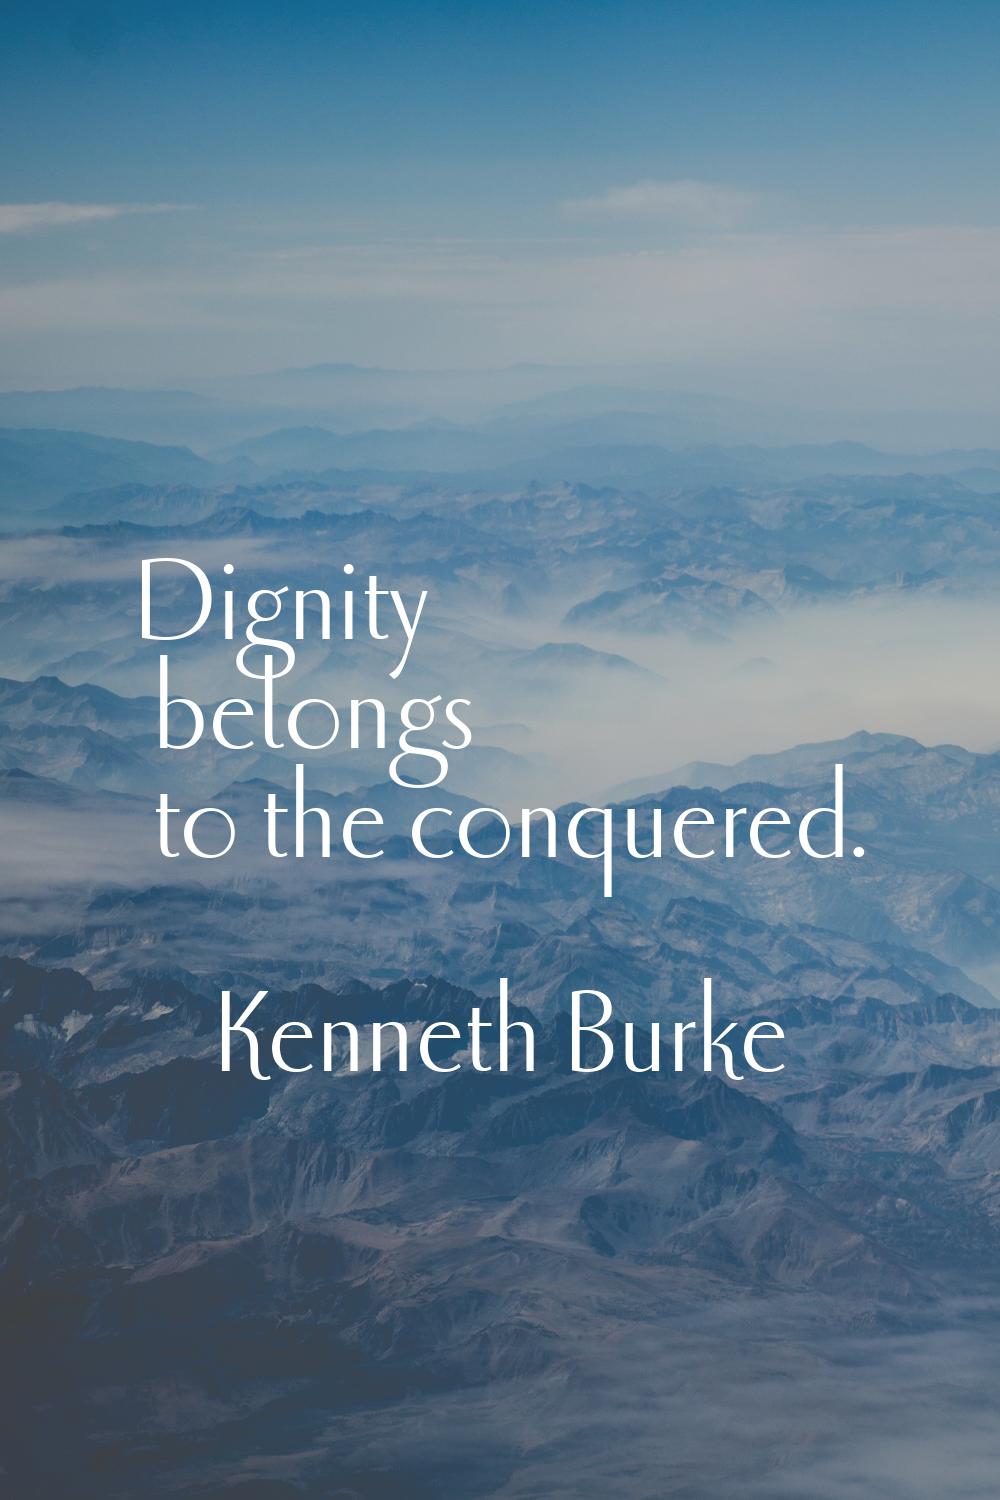 Dignity belongs to the conquered.